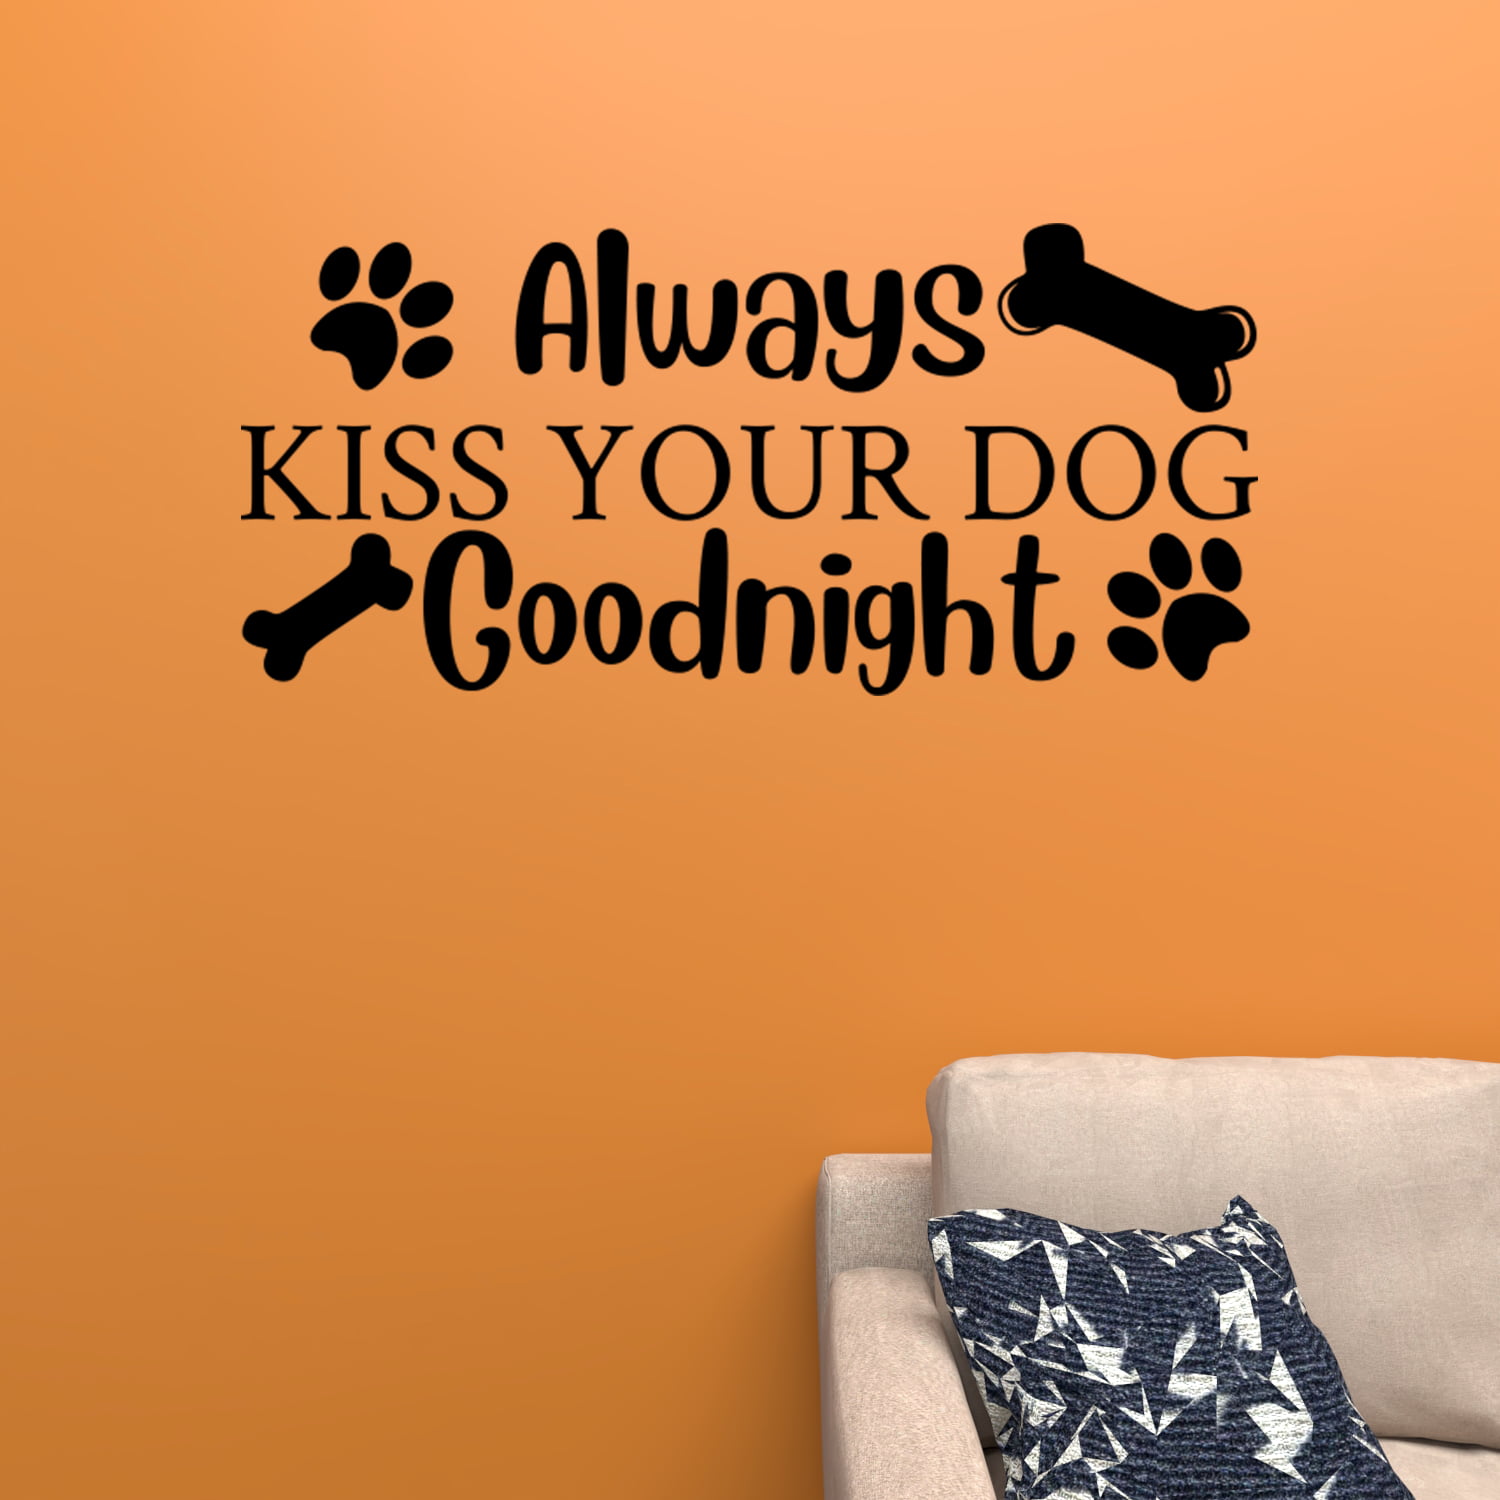 Kiss Your Dog; Kiss Your Baby - But Not Together 